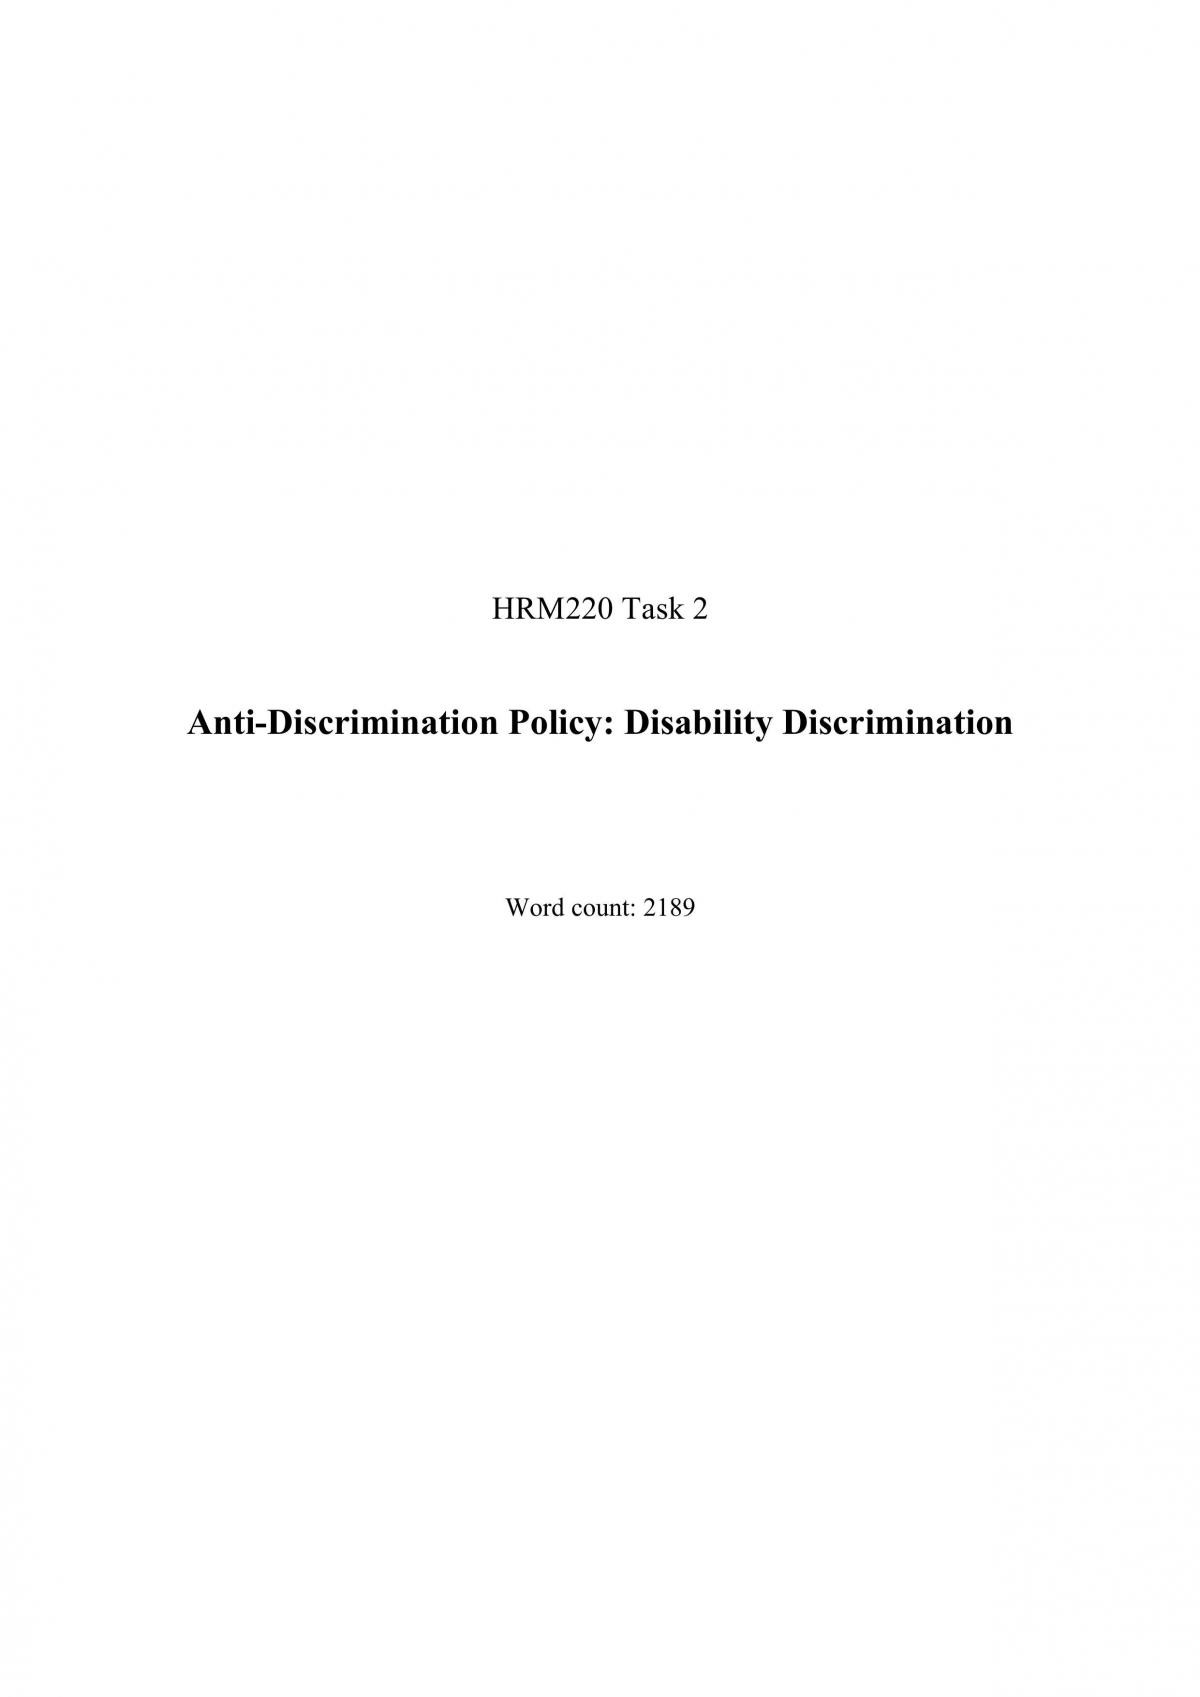 HRM220 Task 2 - Anti-Discrimination Policy - Page 1